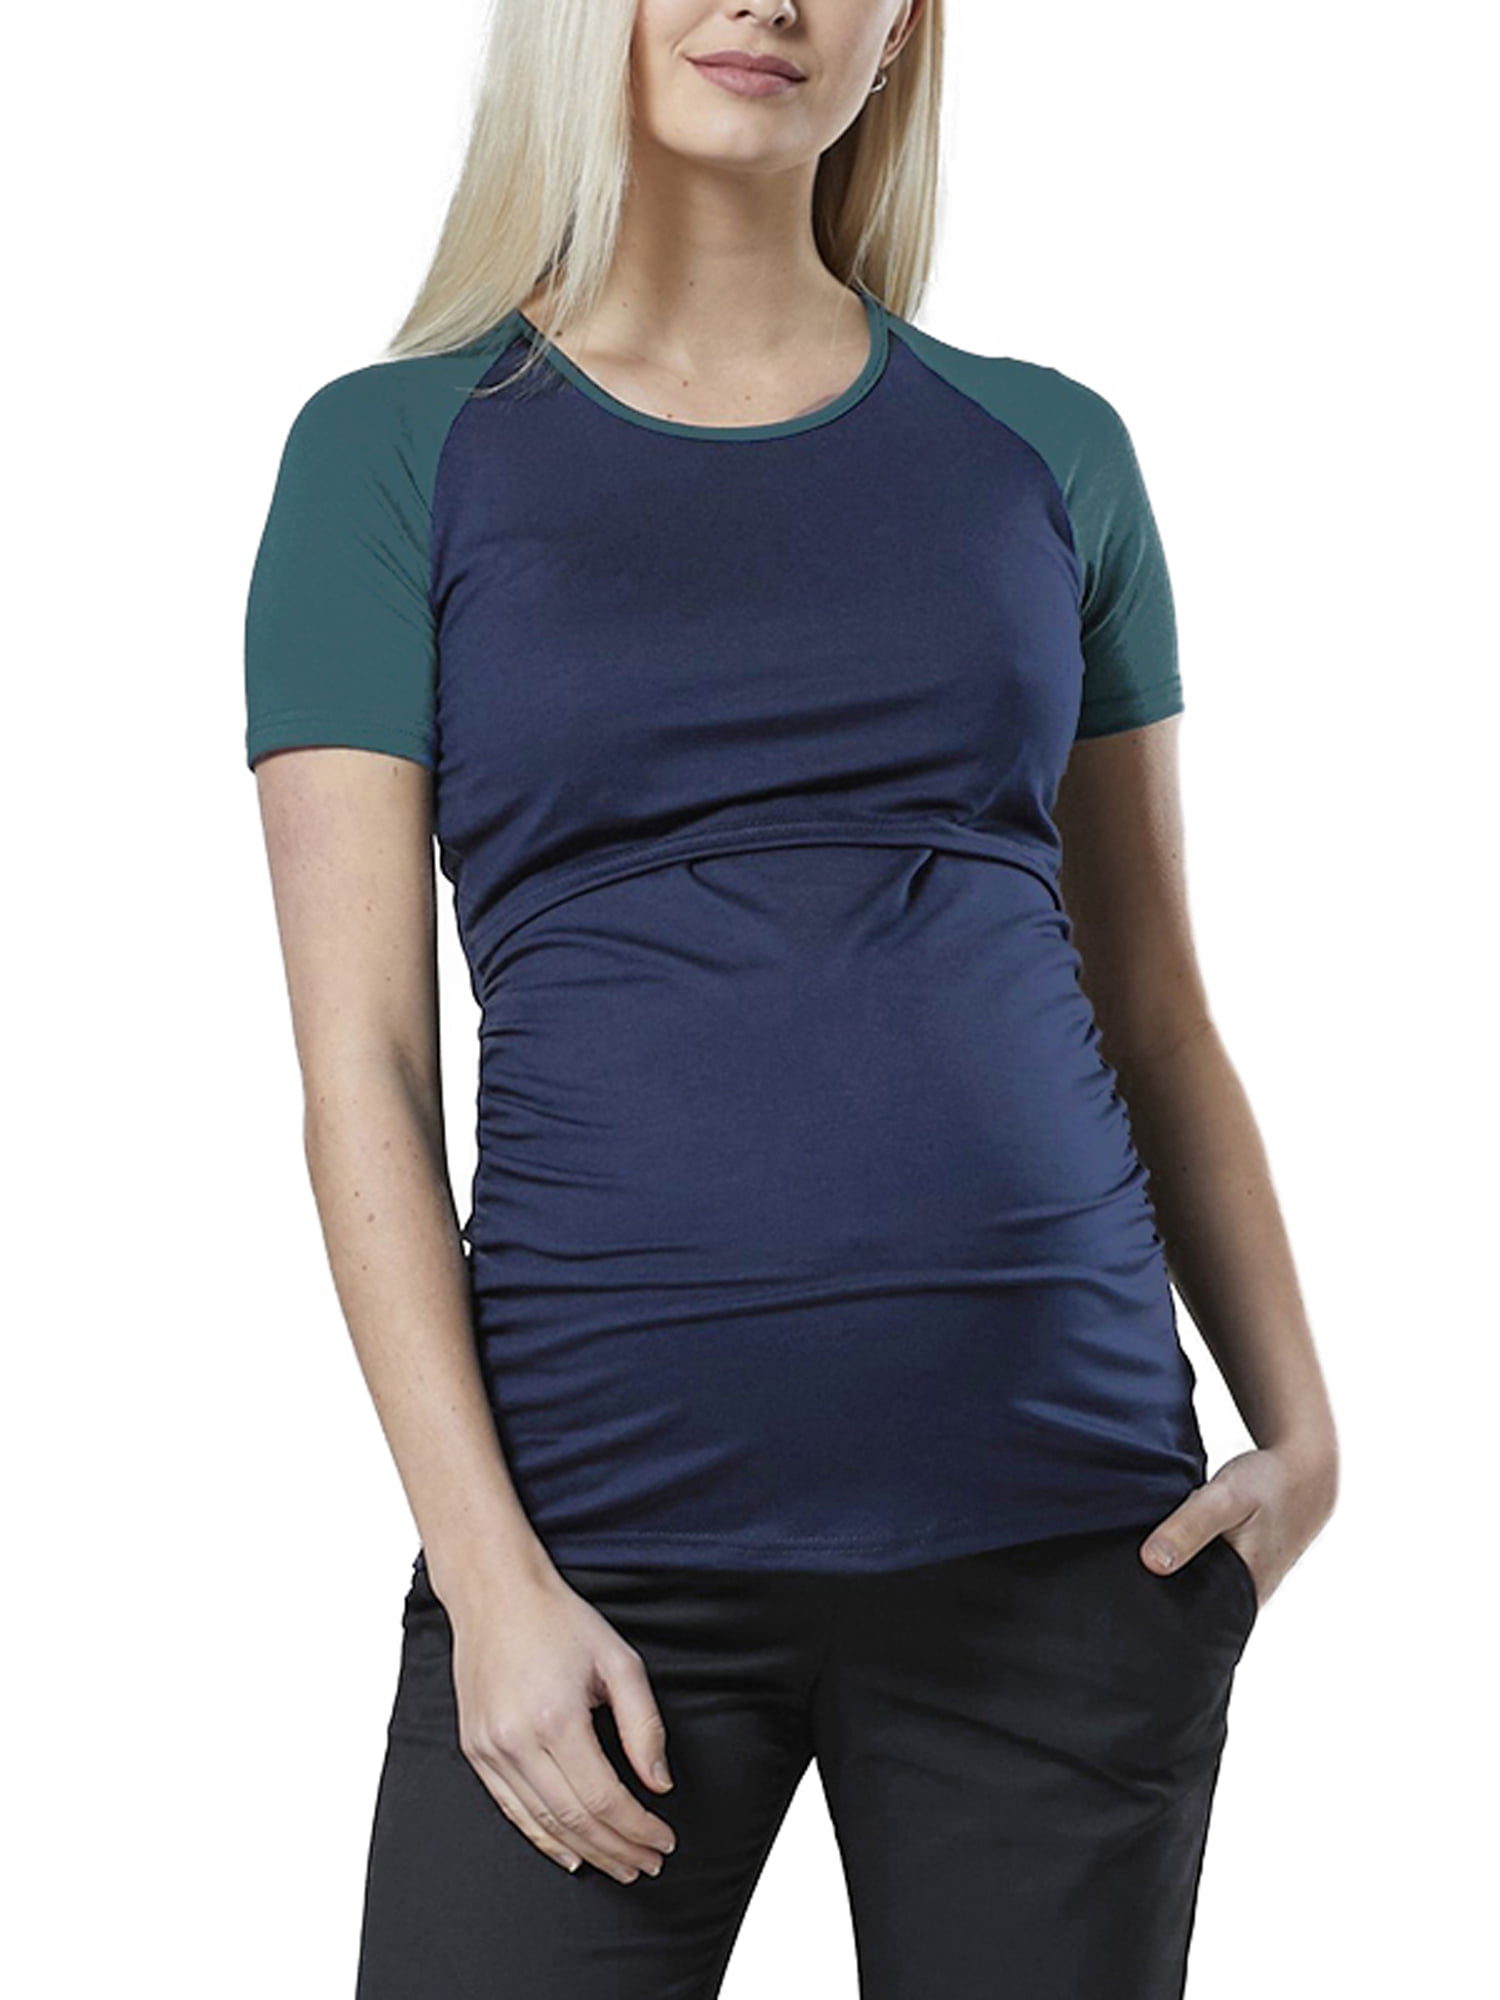 Hotouch Female Maternity Top Solid Side Sleeveless Ruched Pregnancy Shirt Grey XL 